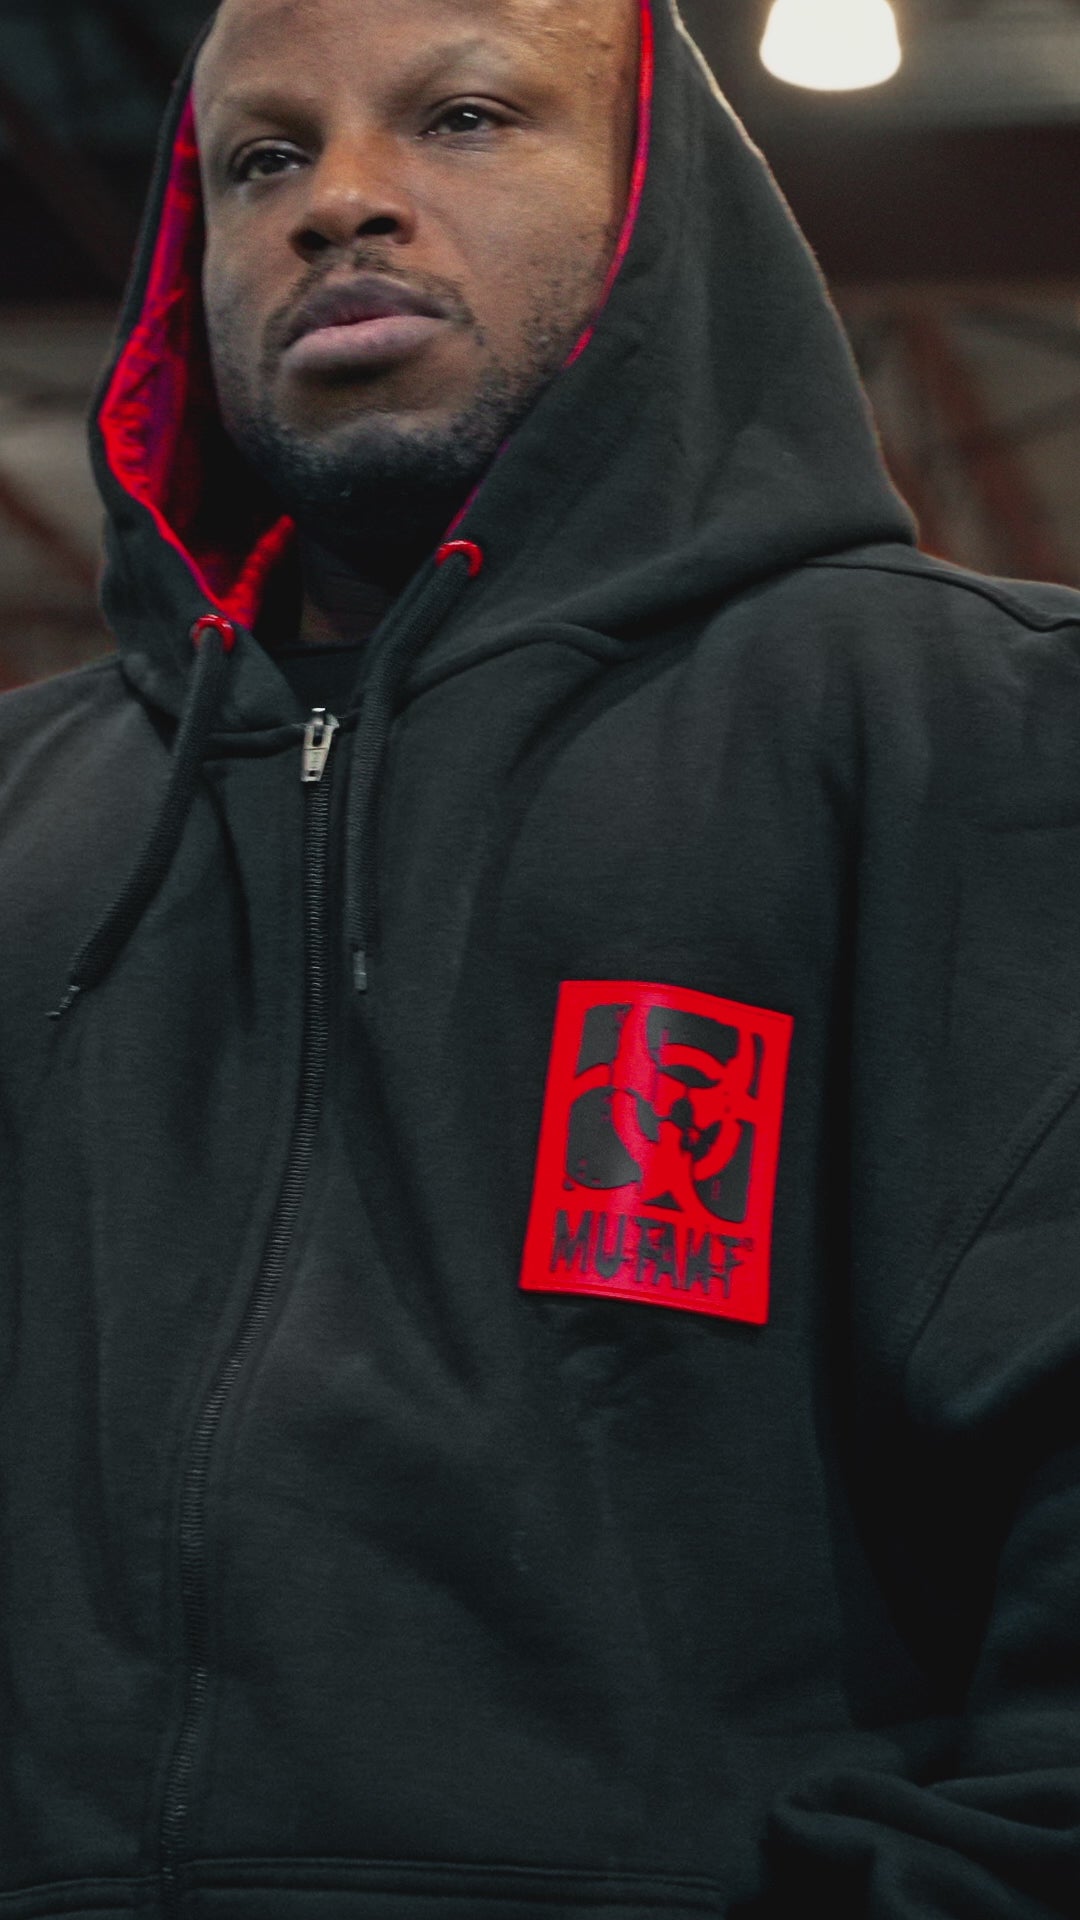 Video featuring Mutant athletes Shaun Clarida, Dusty Hanshaw, and Jamie Christian wearing the Mutant Patched Zip-Up Gym Hoodie in black, grey, and red colors. 